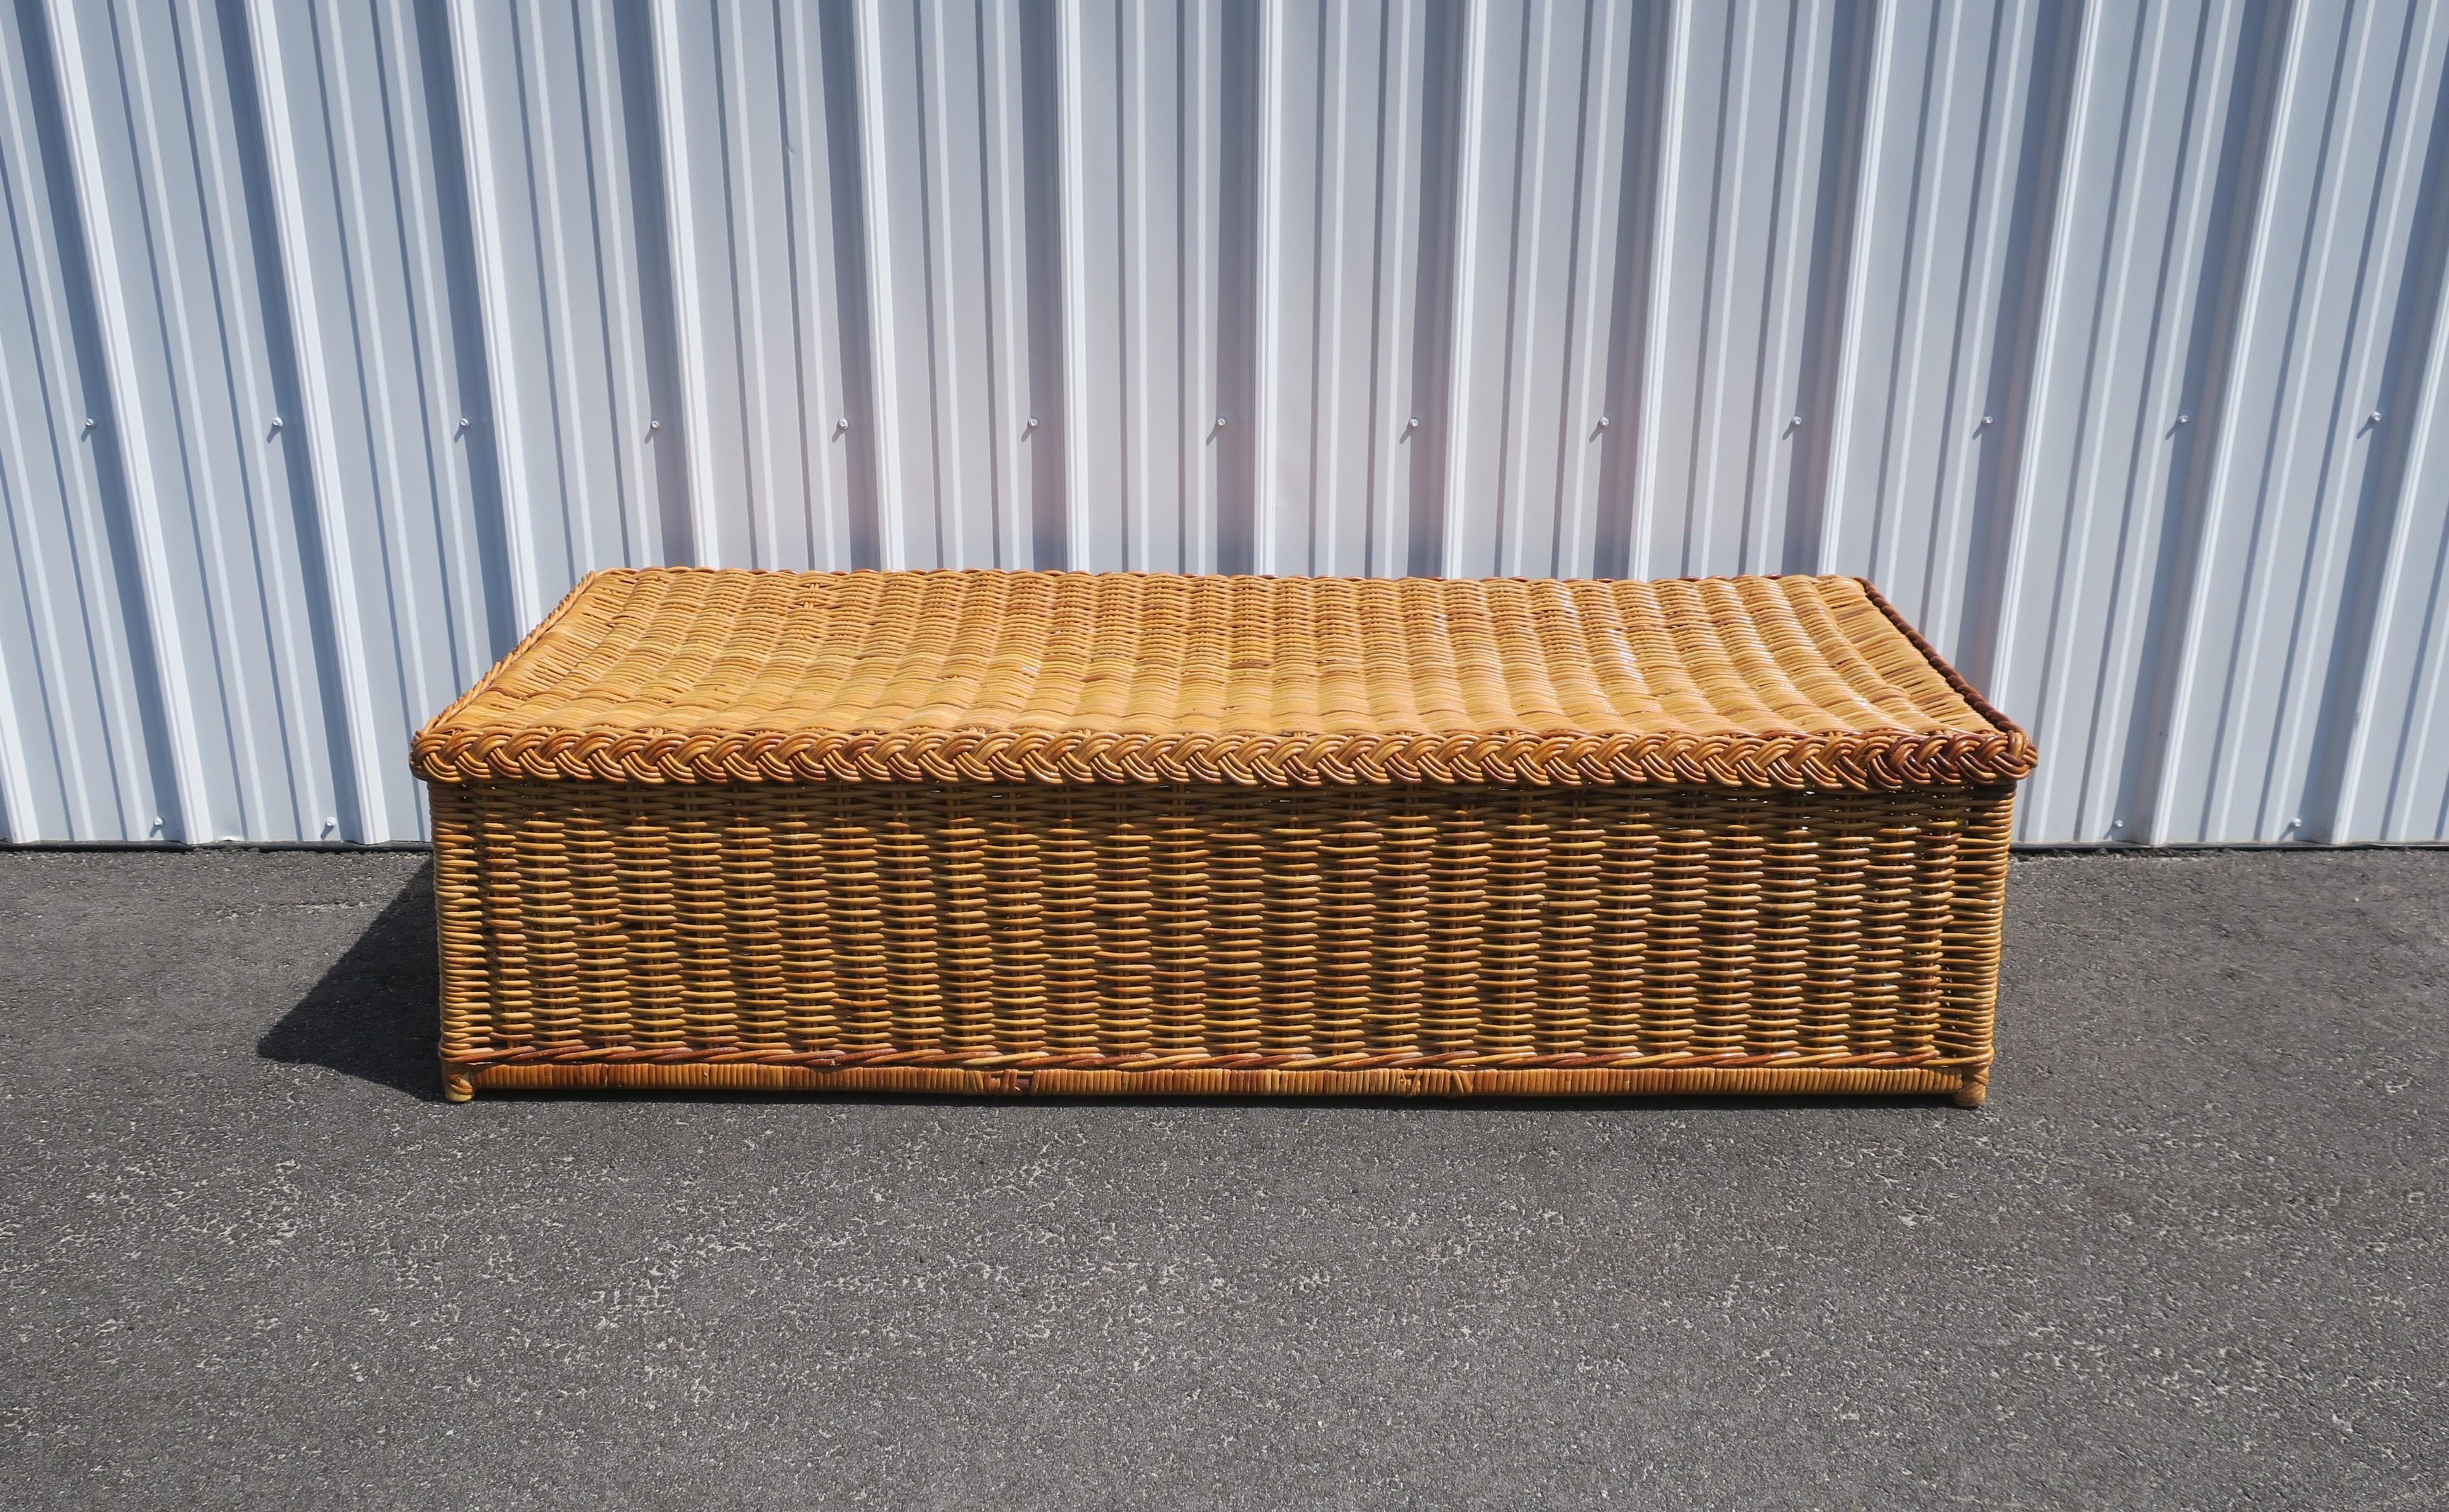 A beautiful natural wicker bench with braided edge, in the style of McGuire Furniture Co., circa mid to late-20th century. Bench is spacious, rectangular, with braided edge around, and relatively long at 60